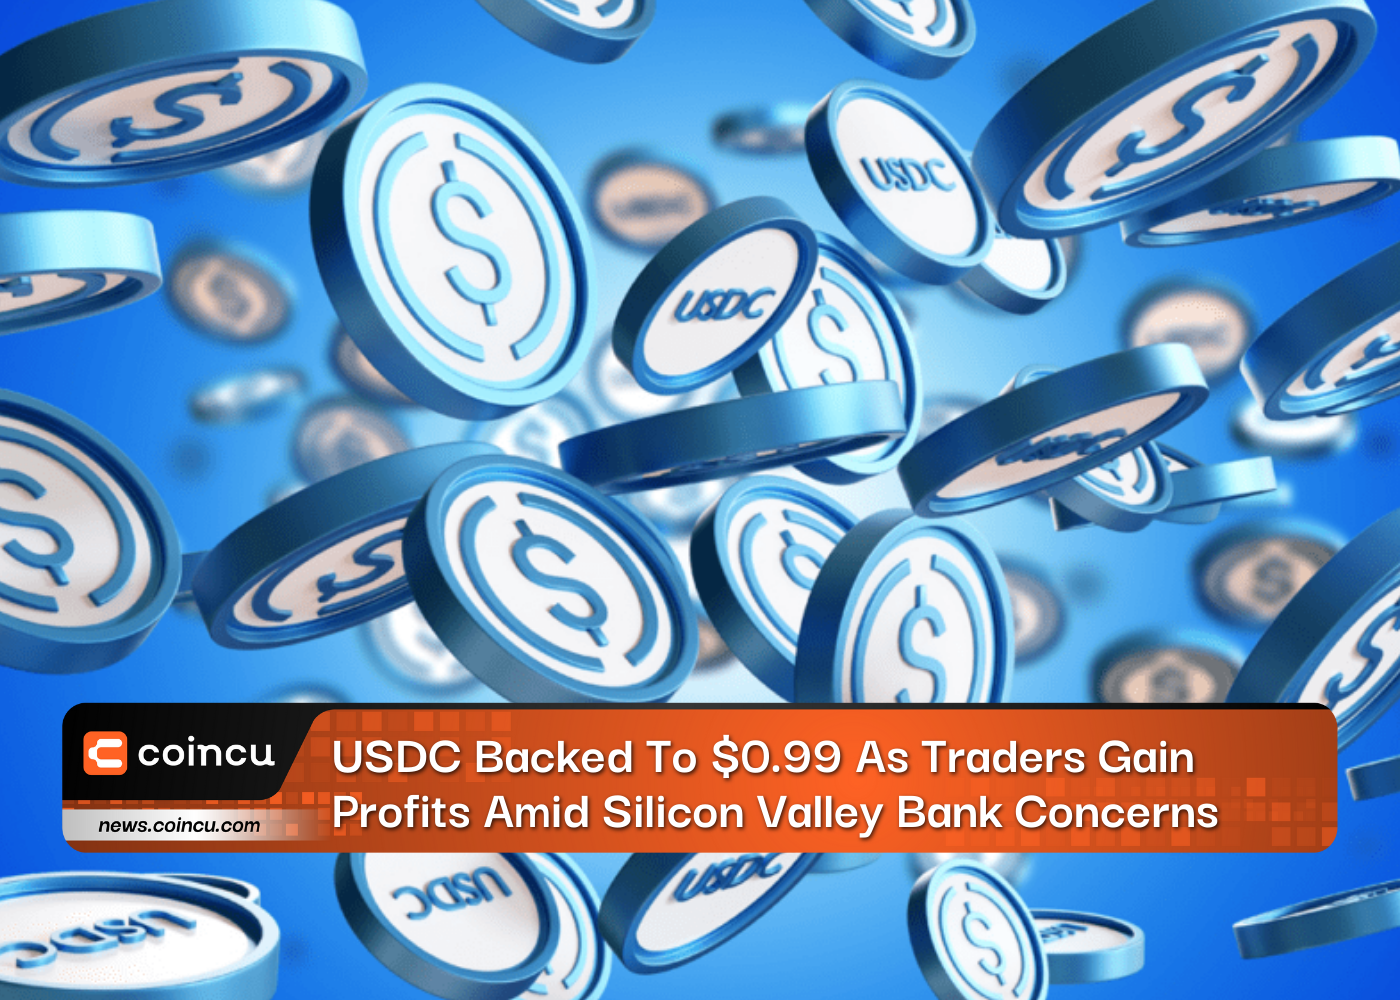 USDC Backed To $0.99 As Traders Gain Profits Amid Silicon Valley Bank Concerns